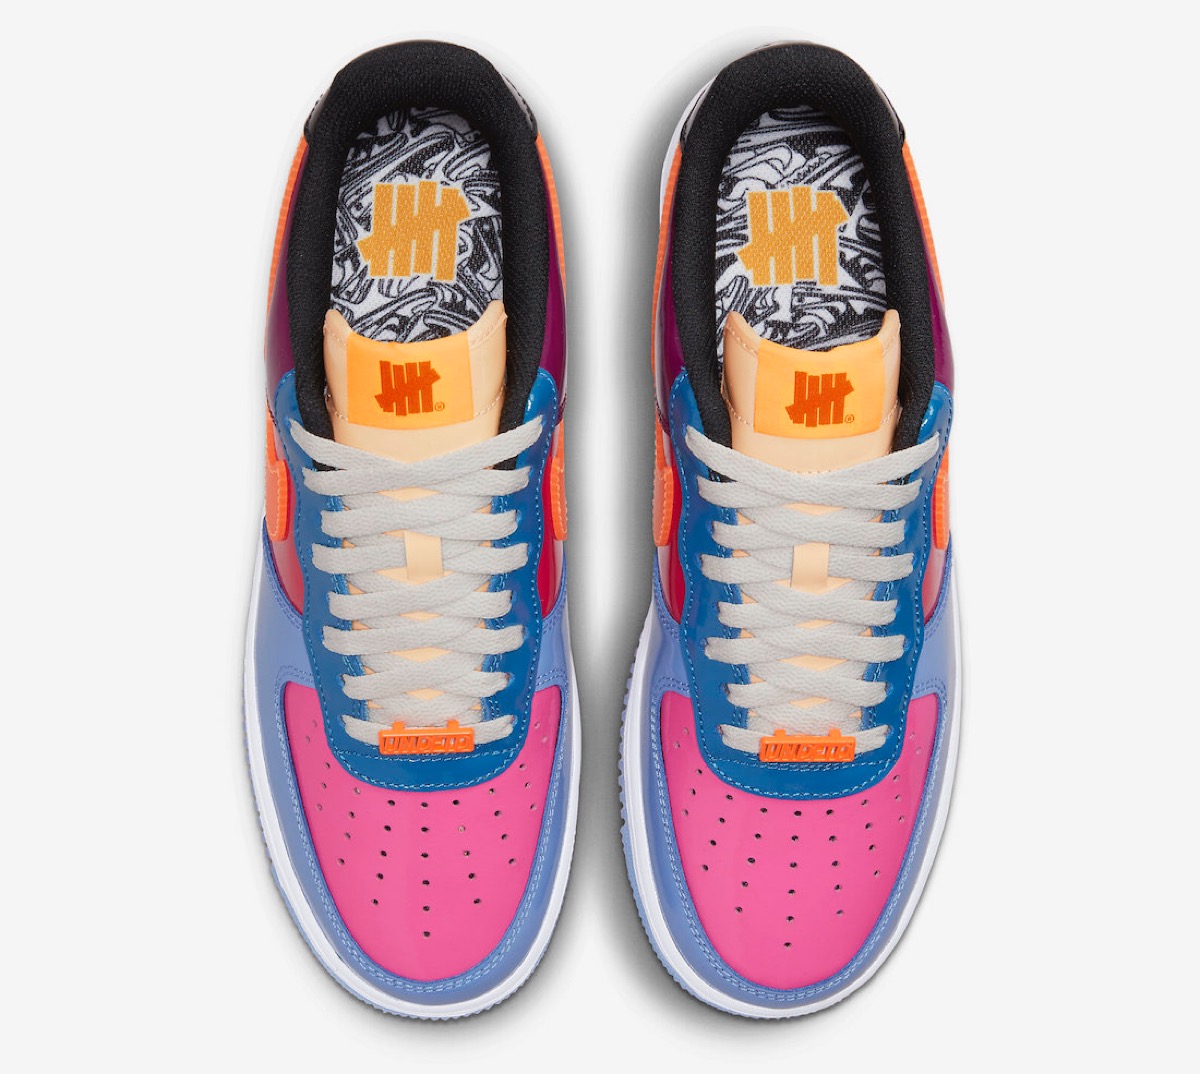 Undefeated × Nike Air Force 1 Low SP “Multi-Patent” Collectionが